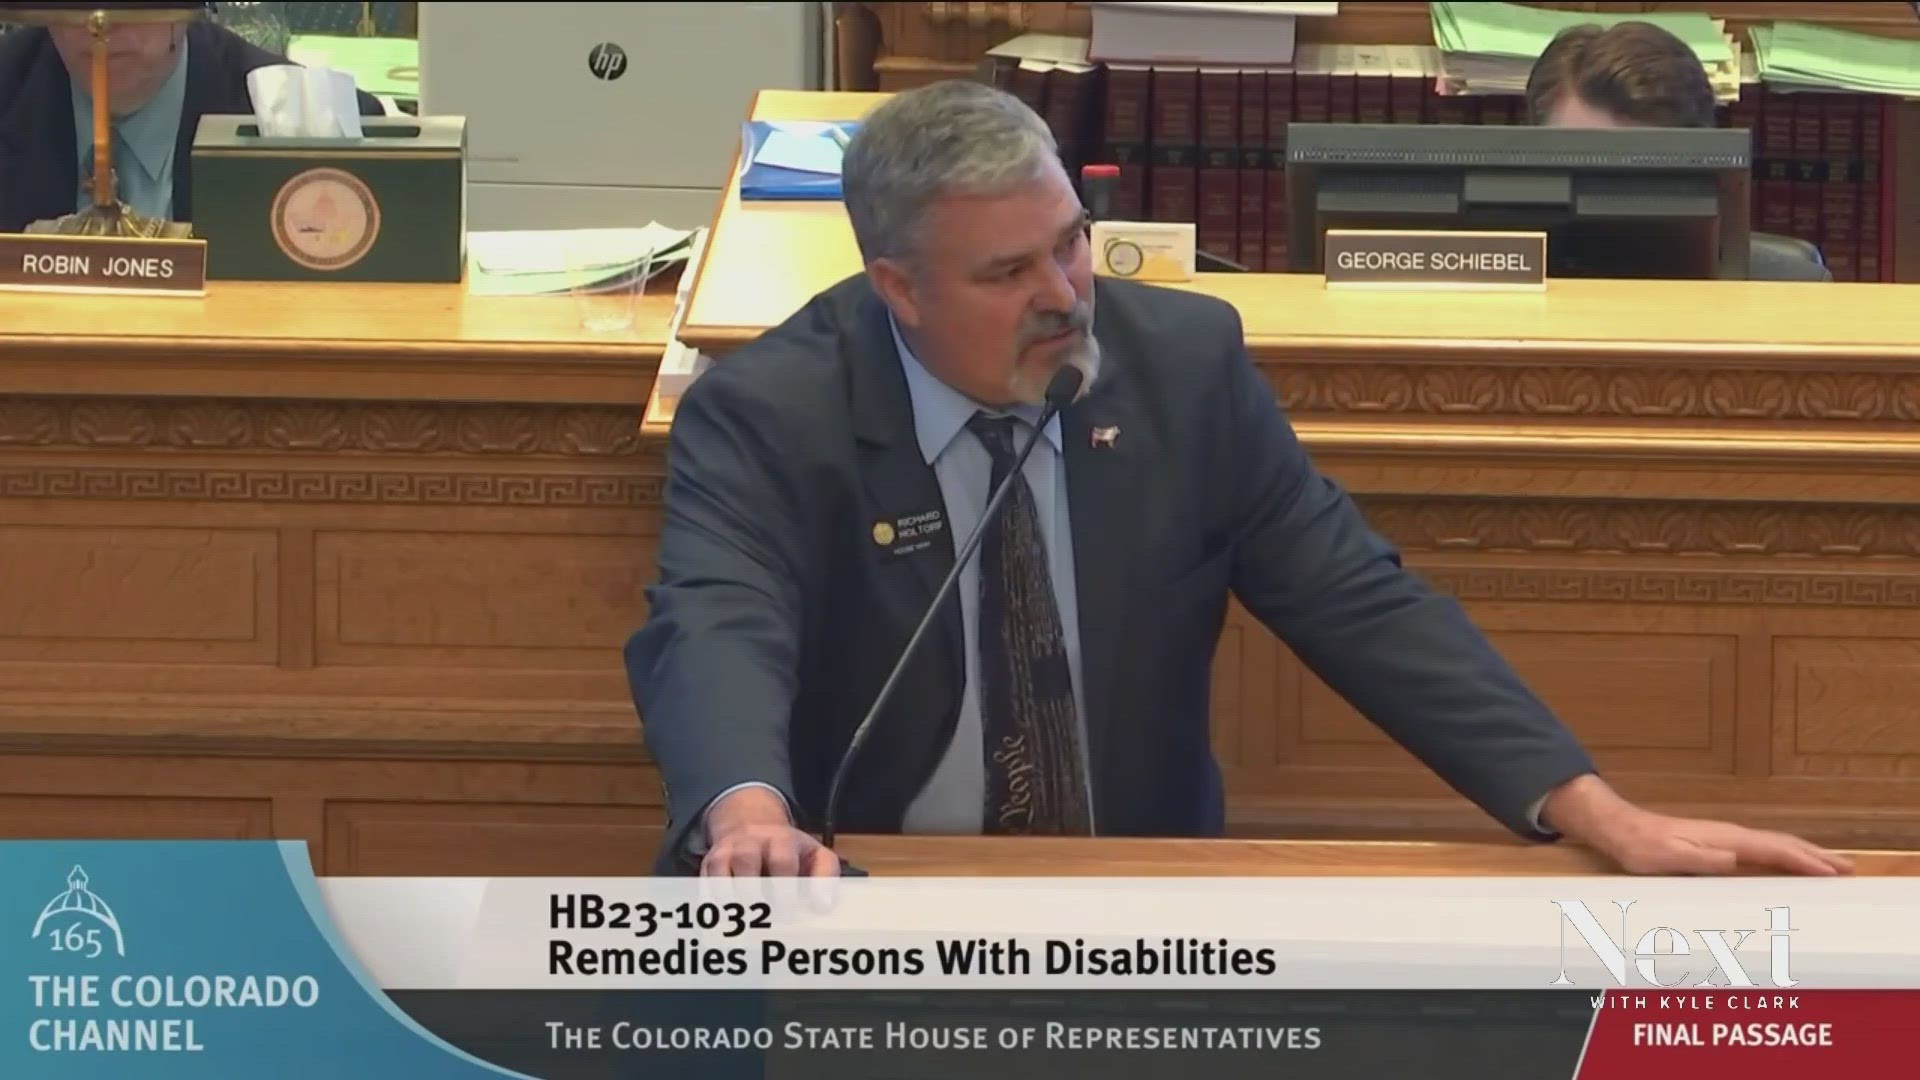 Arguing against House Bill 23-1032, Colorado Rep. Richard Holtorf (R-Akron) likened people with disabilities to people who choose to run with the bulls in Spain.